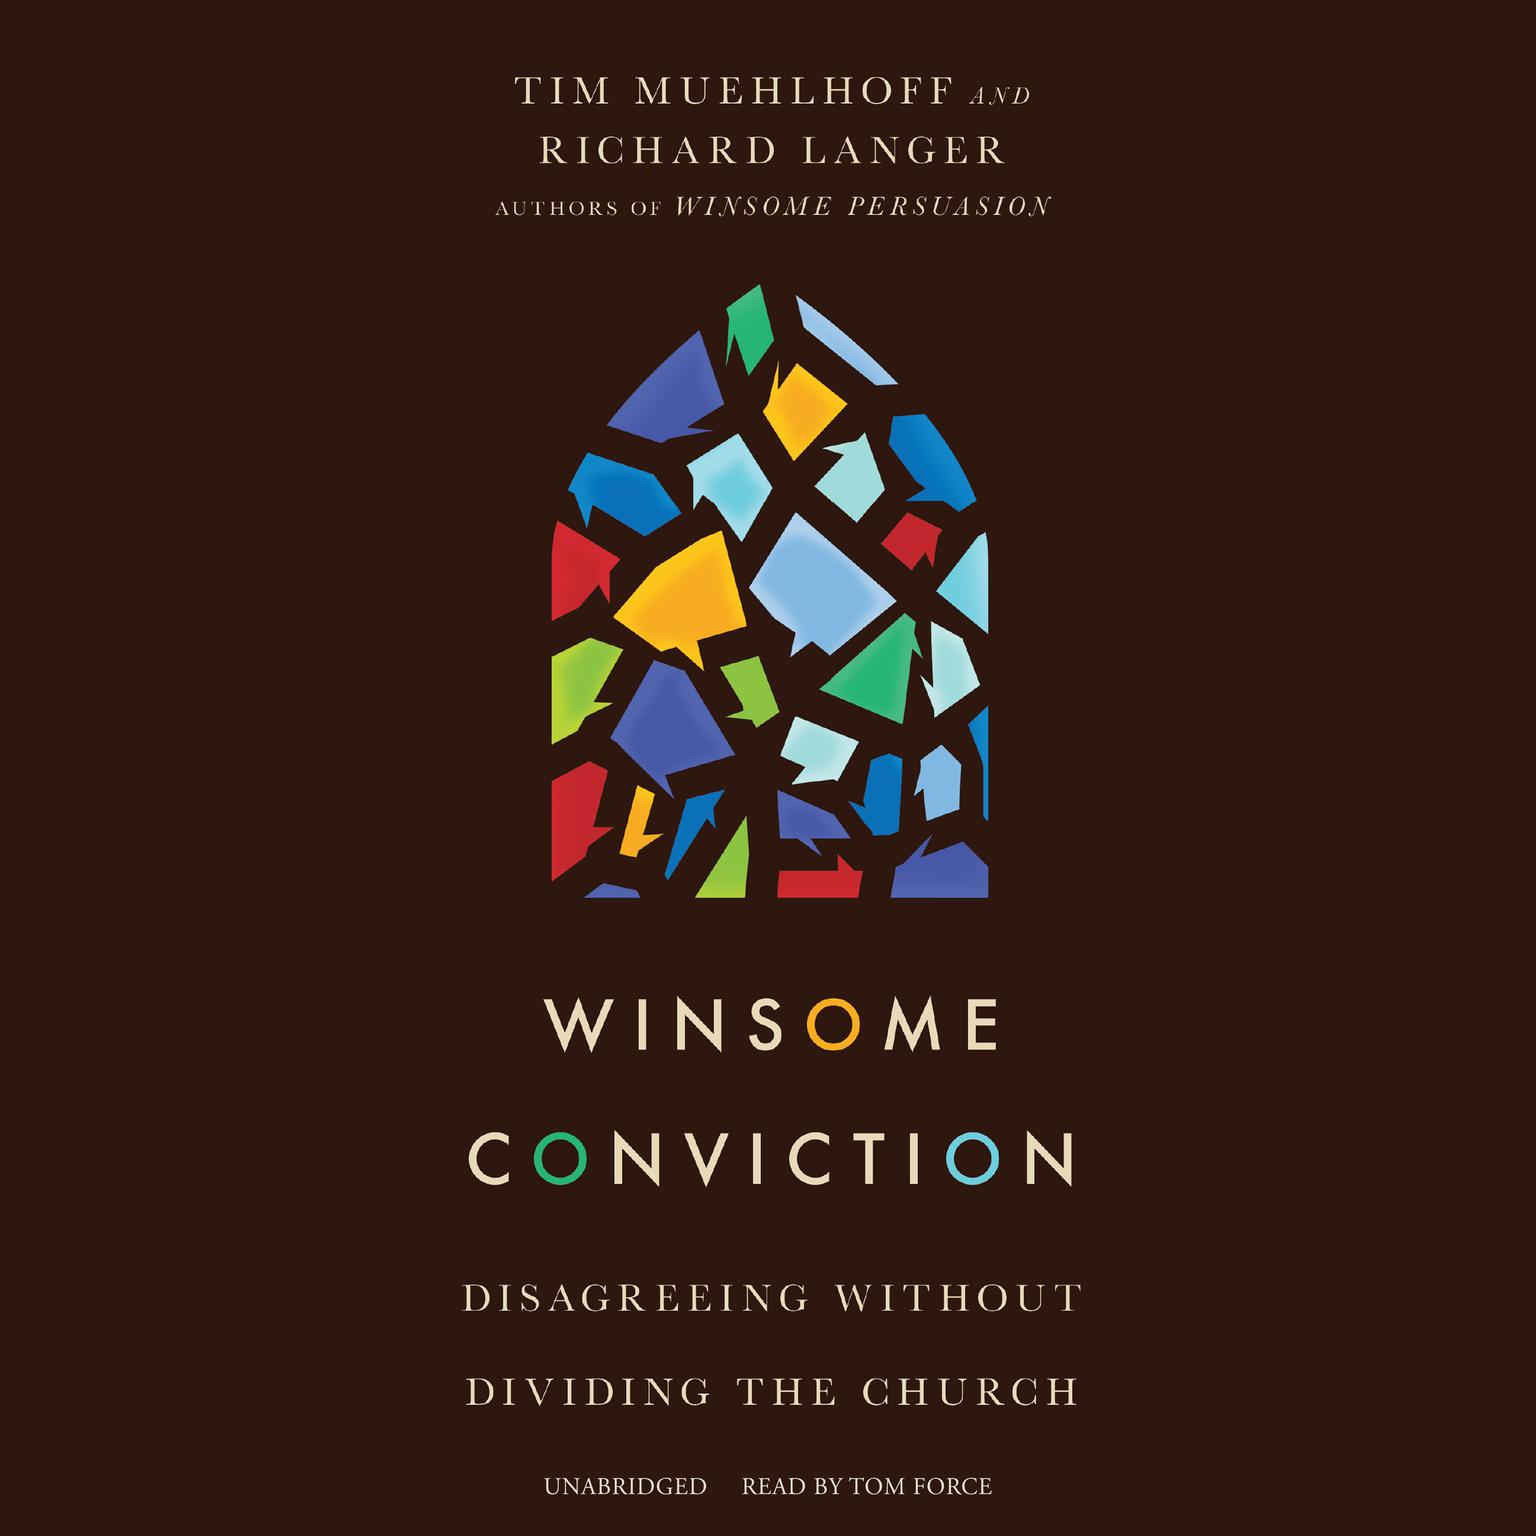 Winsome Conviction: Disagreeing Without Dividing the Church Audiobook, by Tim Muehlhoff